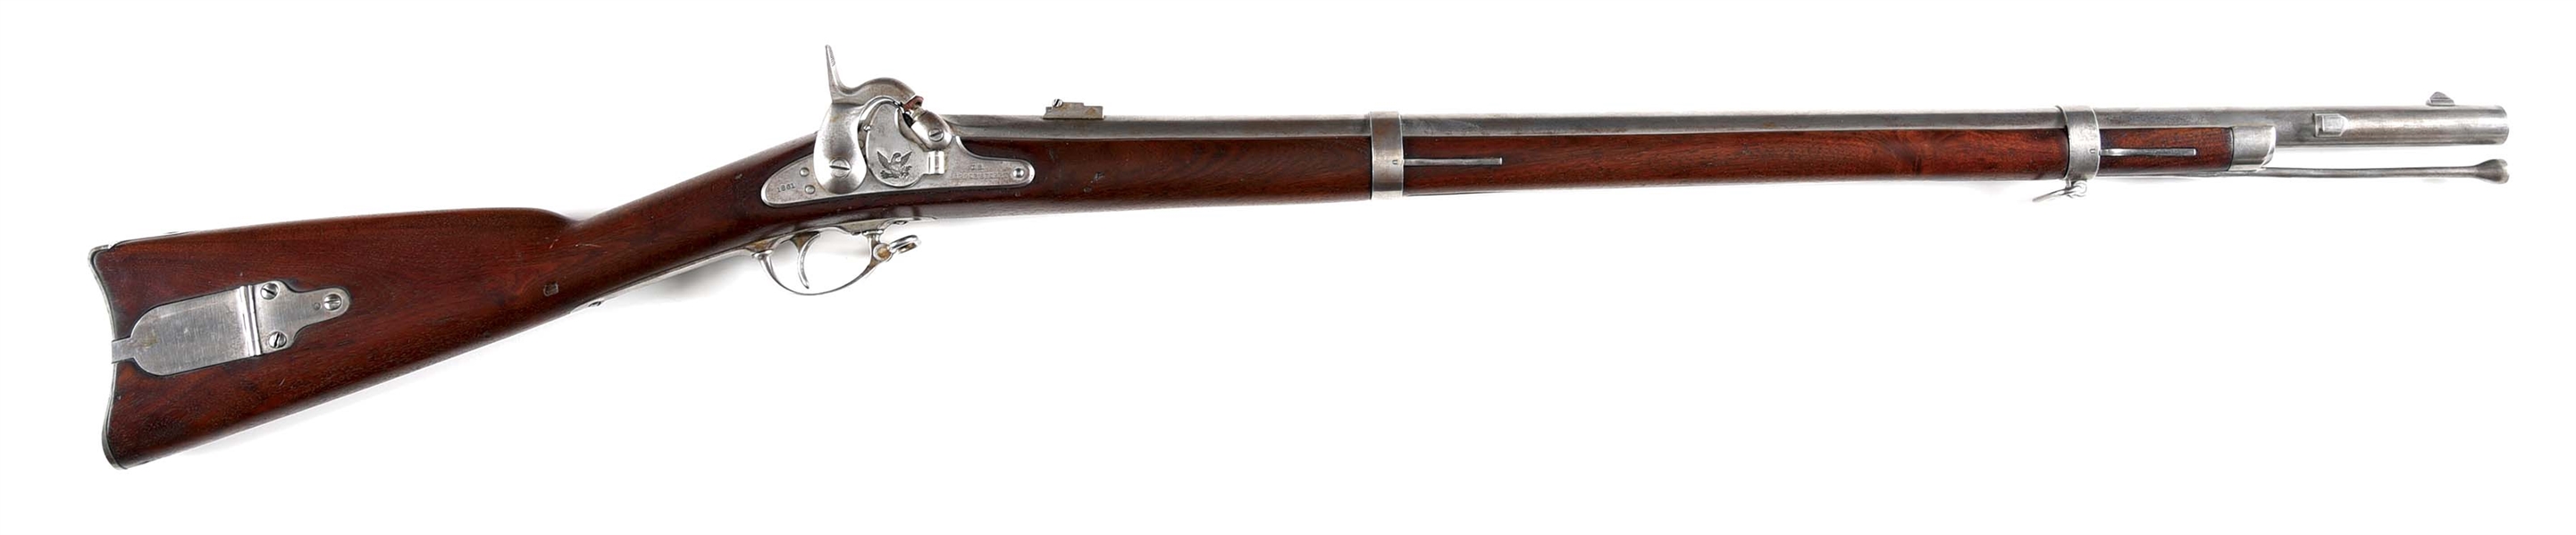 (A) HARPERS FERRY MODEL 1855 PERCUSSION RIFLE.